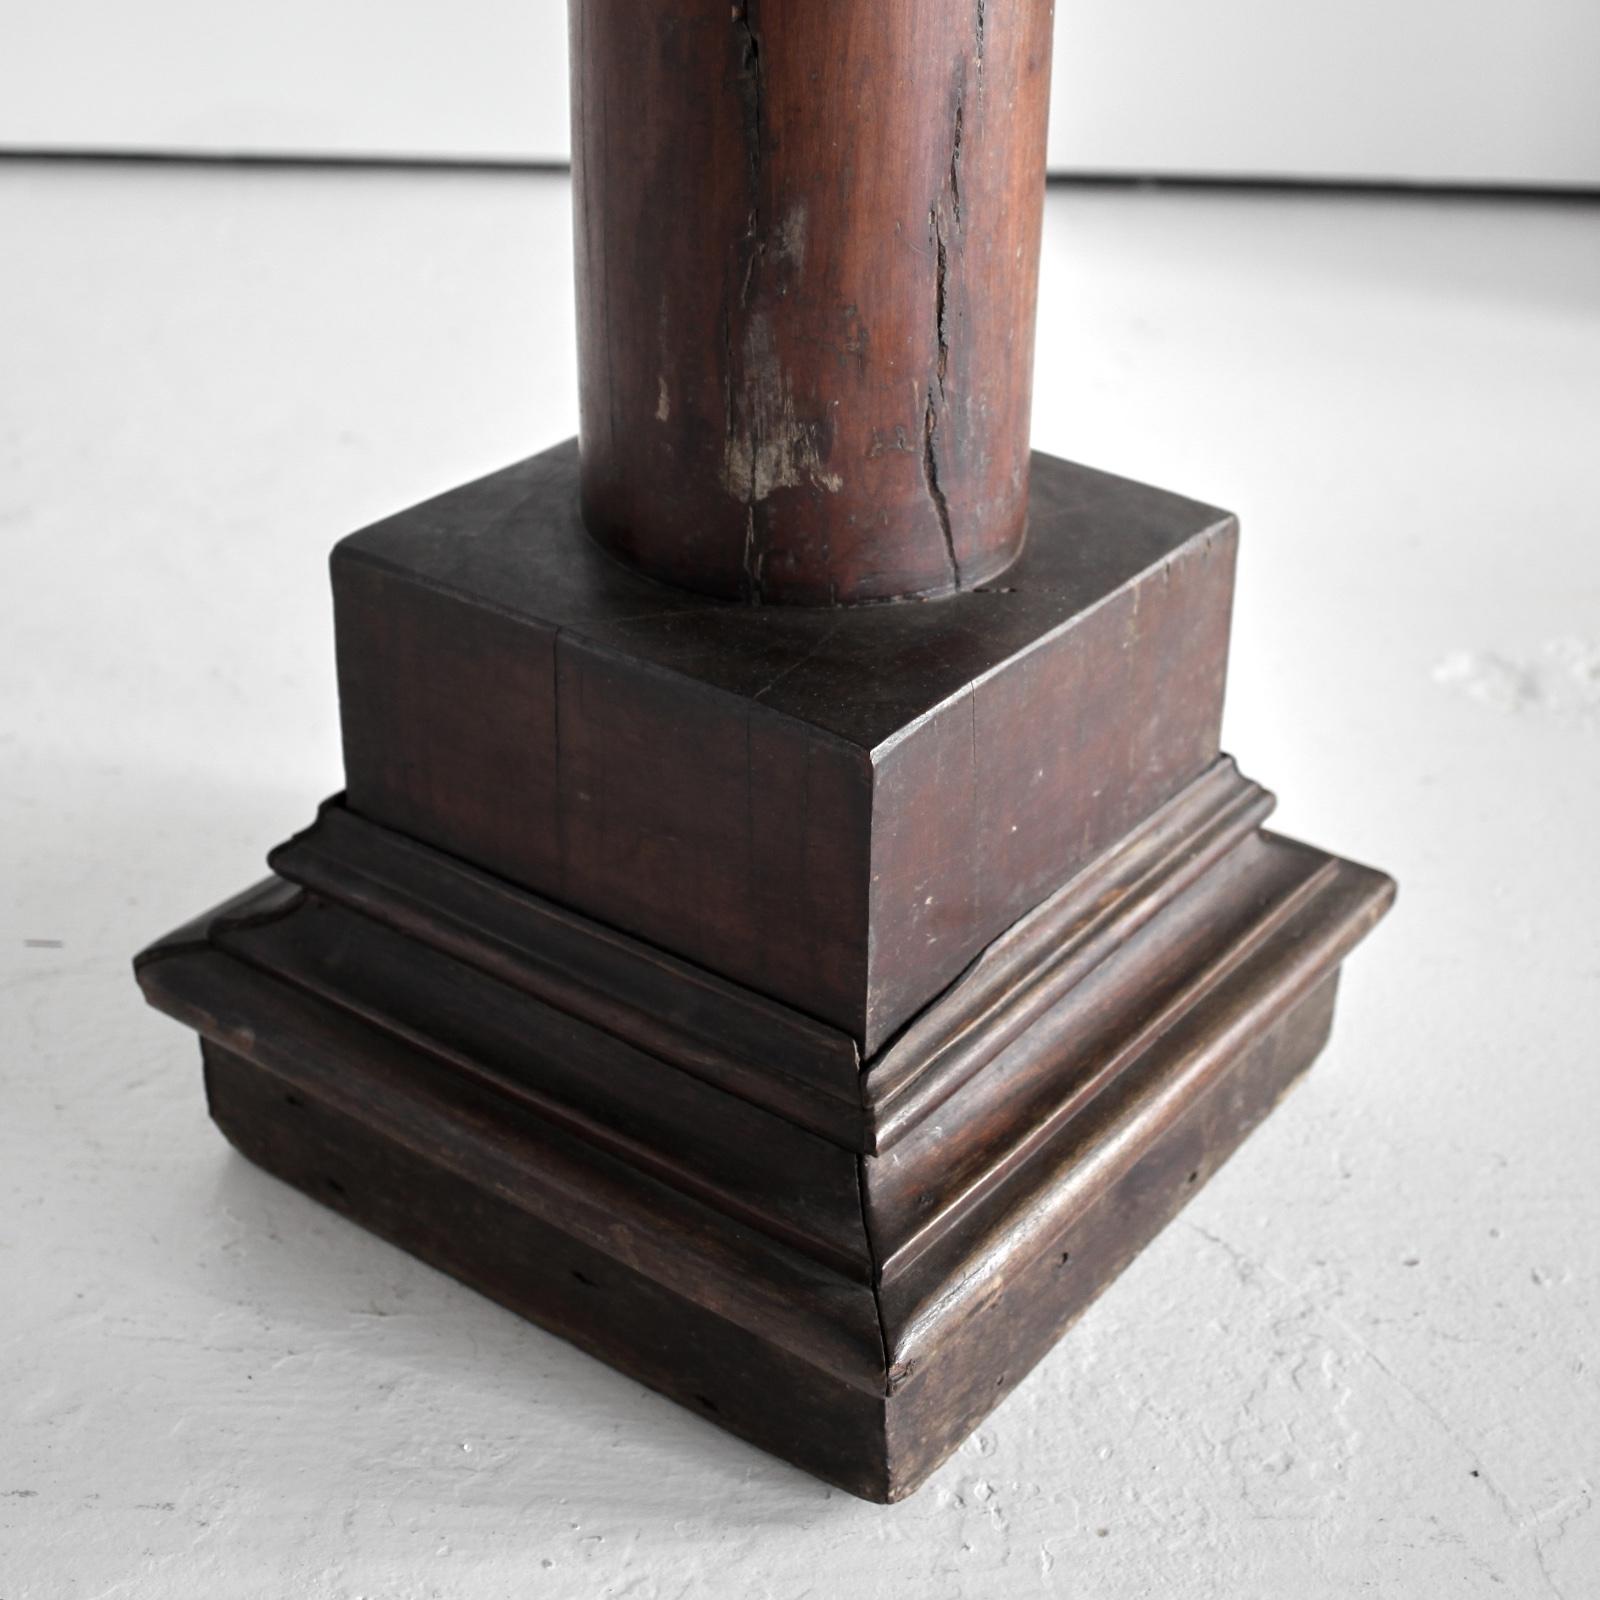 Monumental Early 19Th C. Primitive Northern Portuguese Plinth For Sale 2